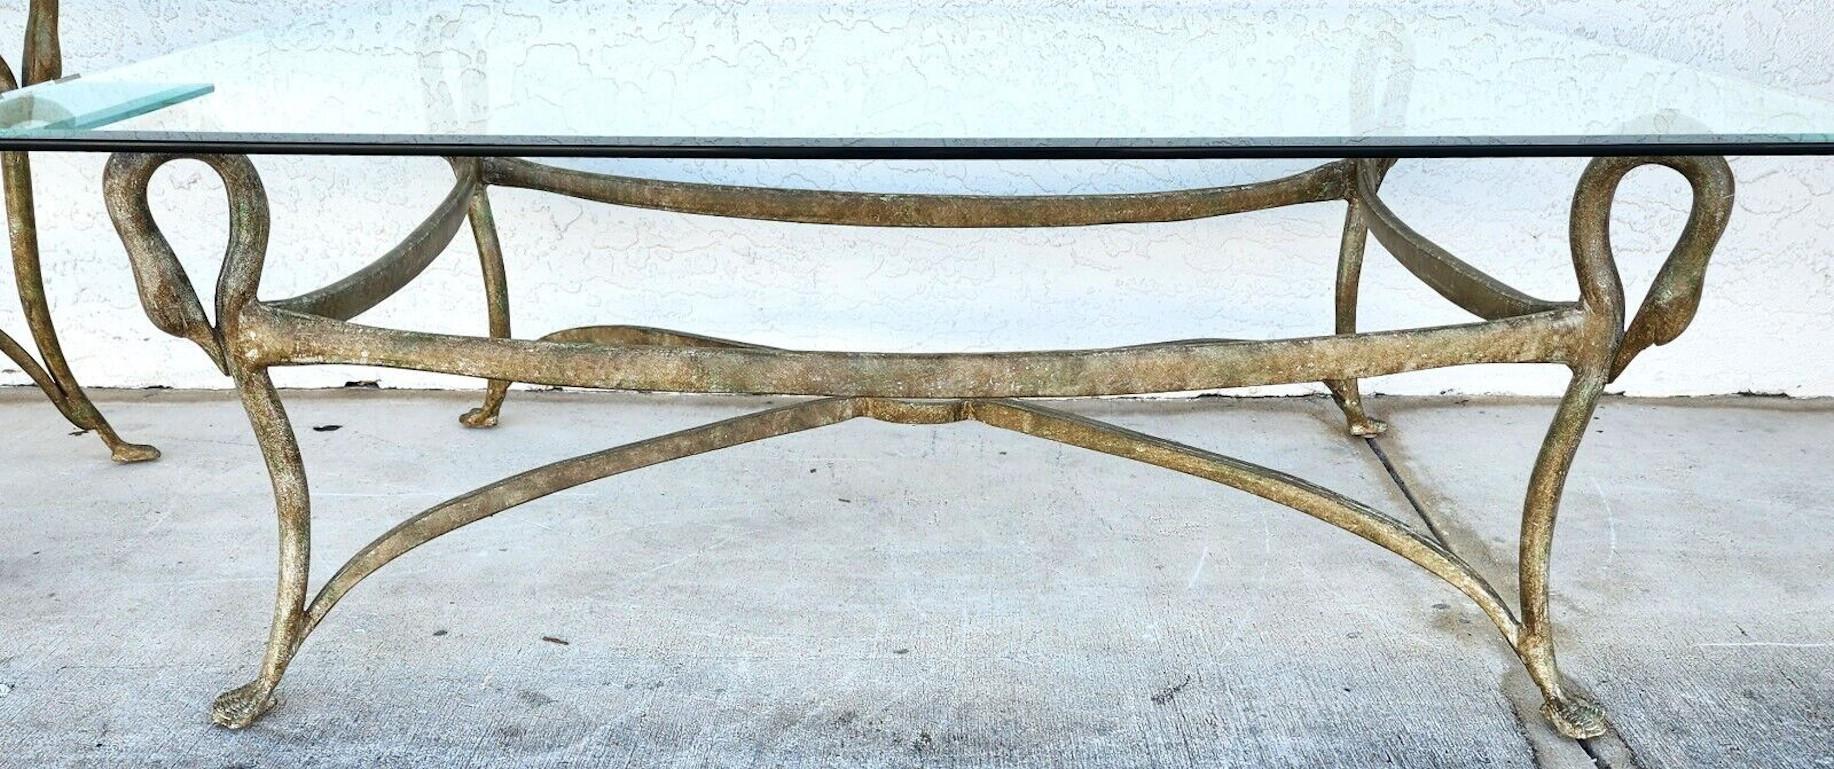 For FULL item description click on CONTINUE READING at the bottom of this page.

Offering One Of Our Recent Palm Beach Estate Fine Furniture Acquisitions Of A
Pair of Maison Jansen Style Patinated Metal Swan Head Cocktail & Side Tables
 
Approximate